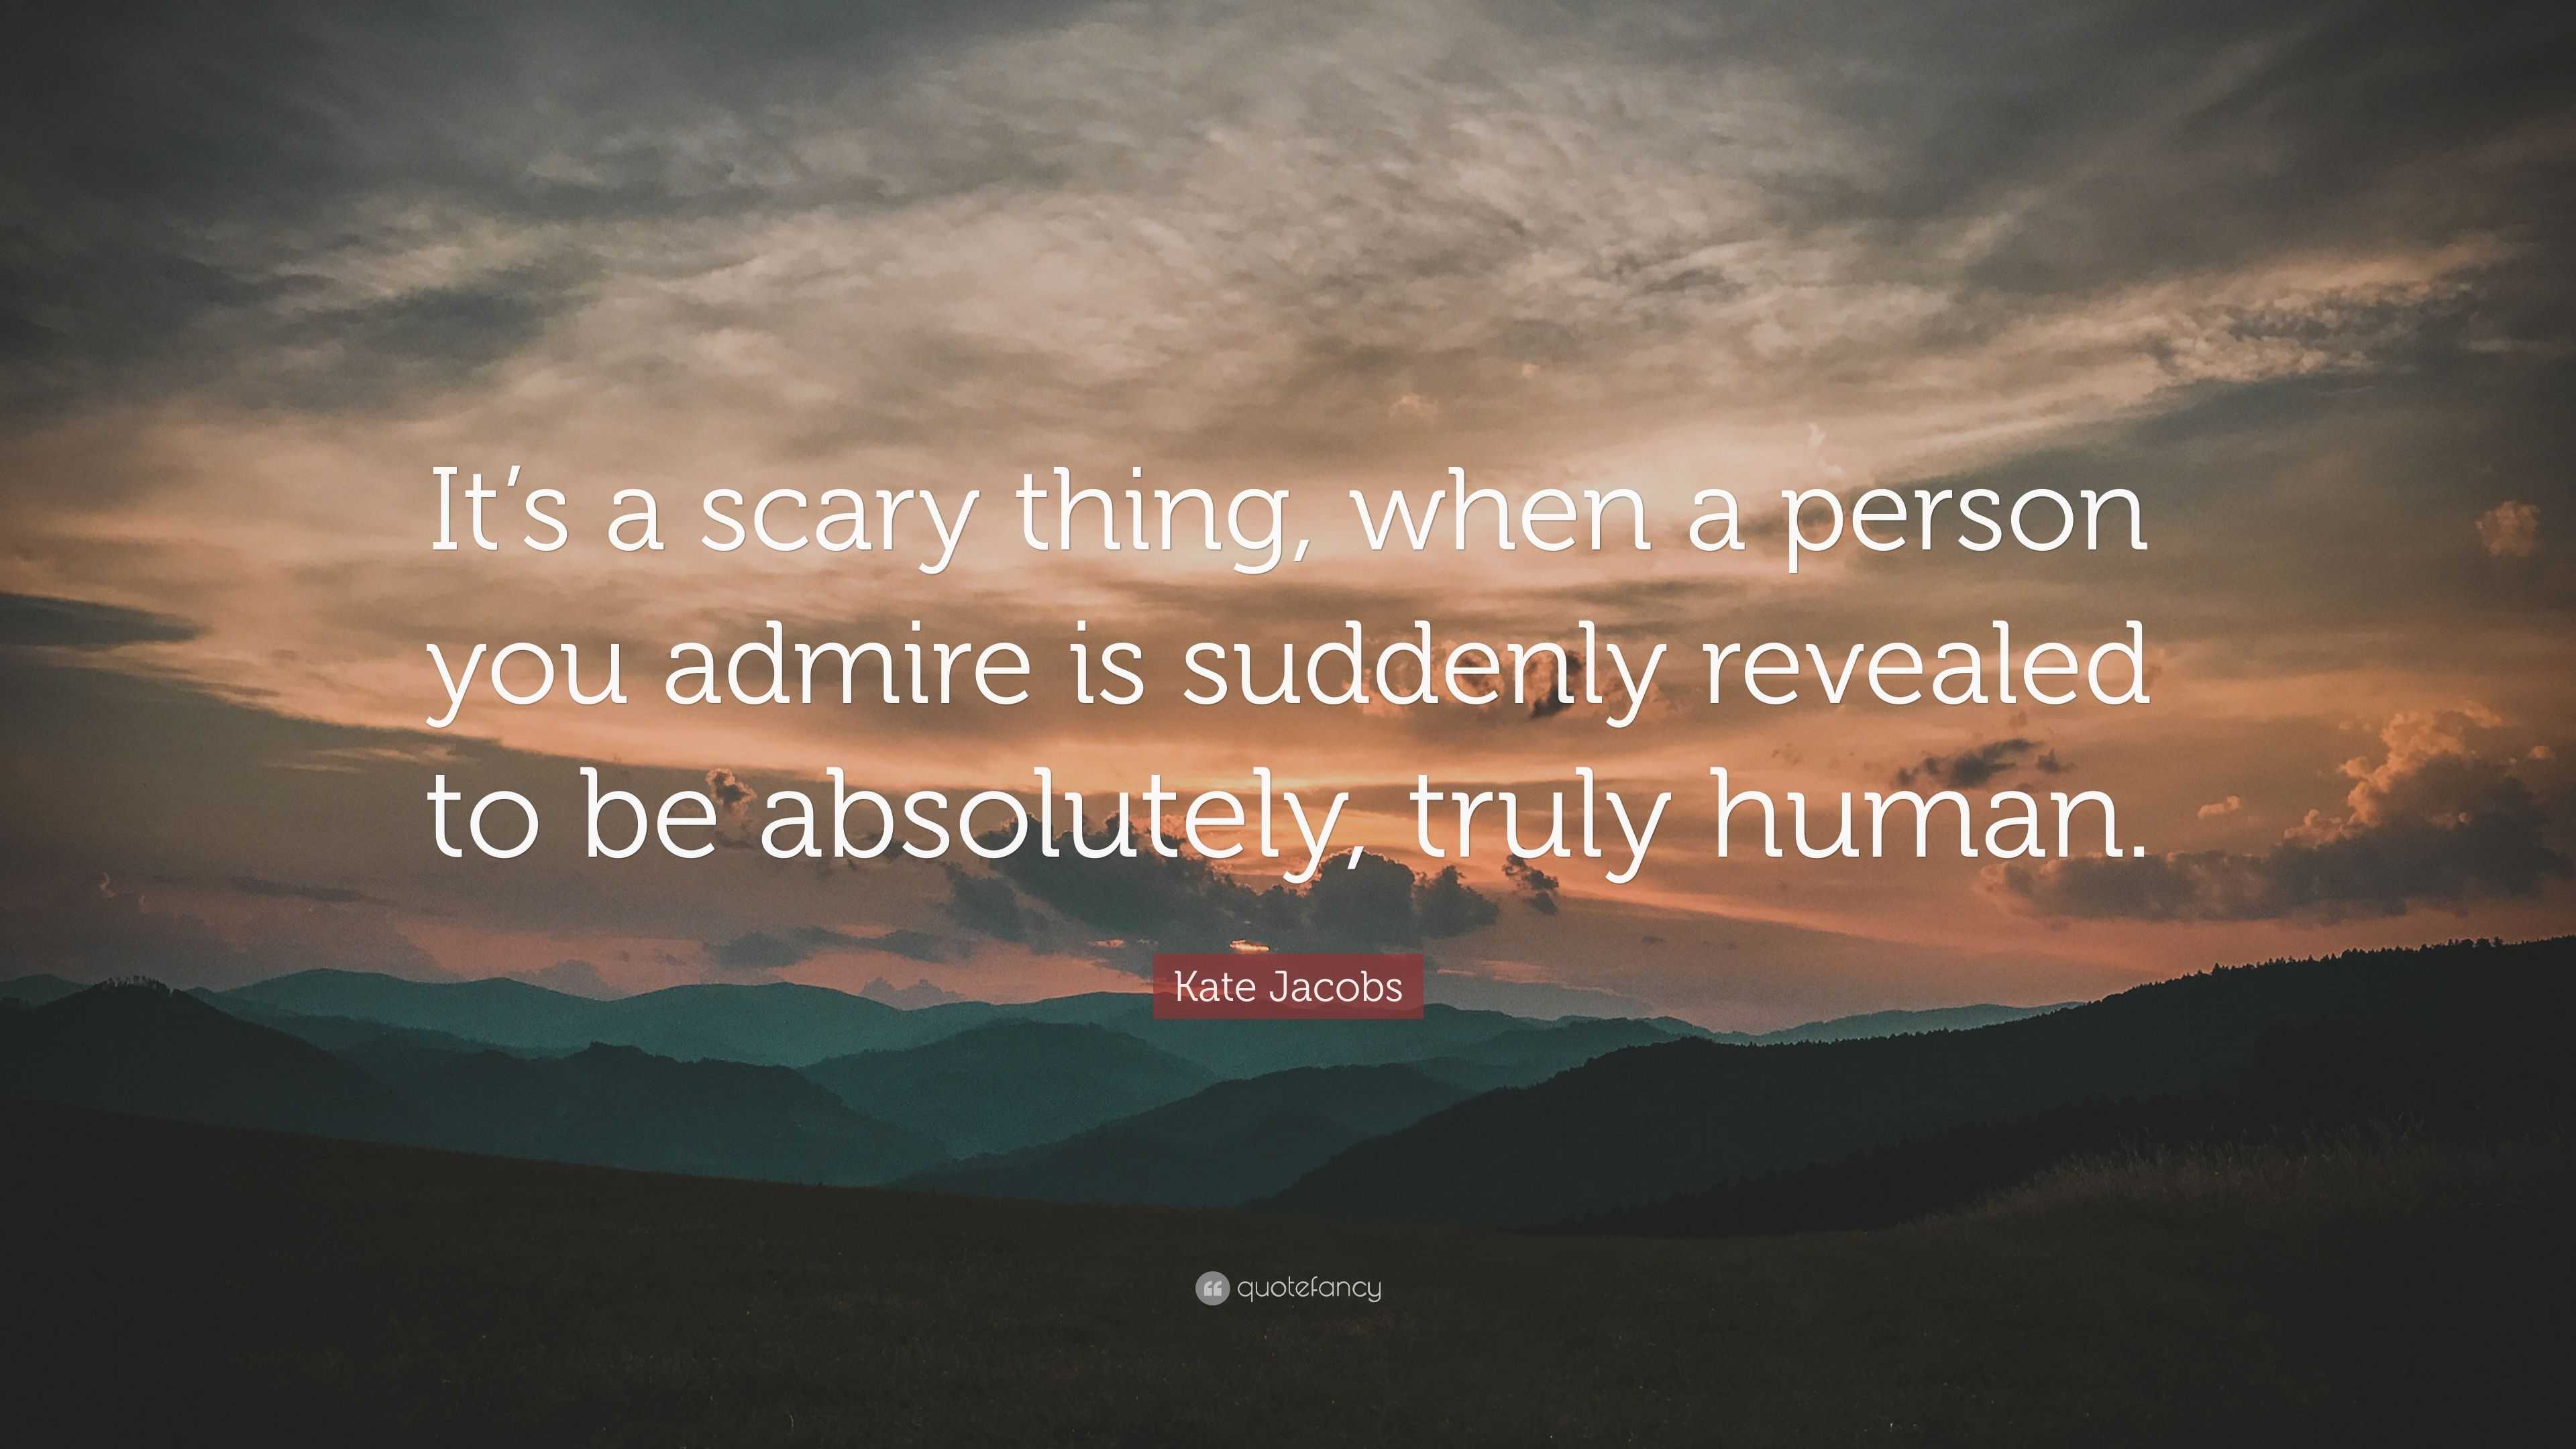 Kate Jacobs Quote: “It’s a scary thing, when a person you admire is